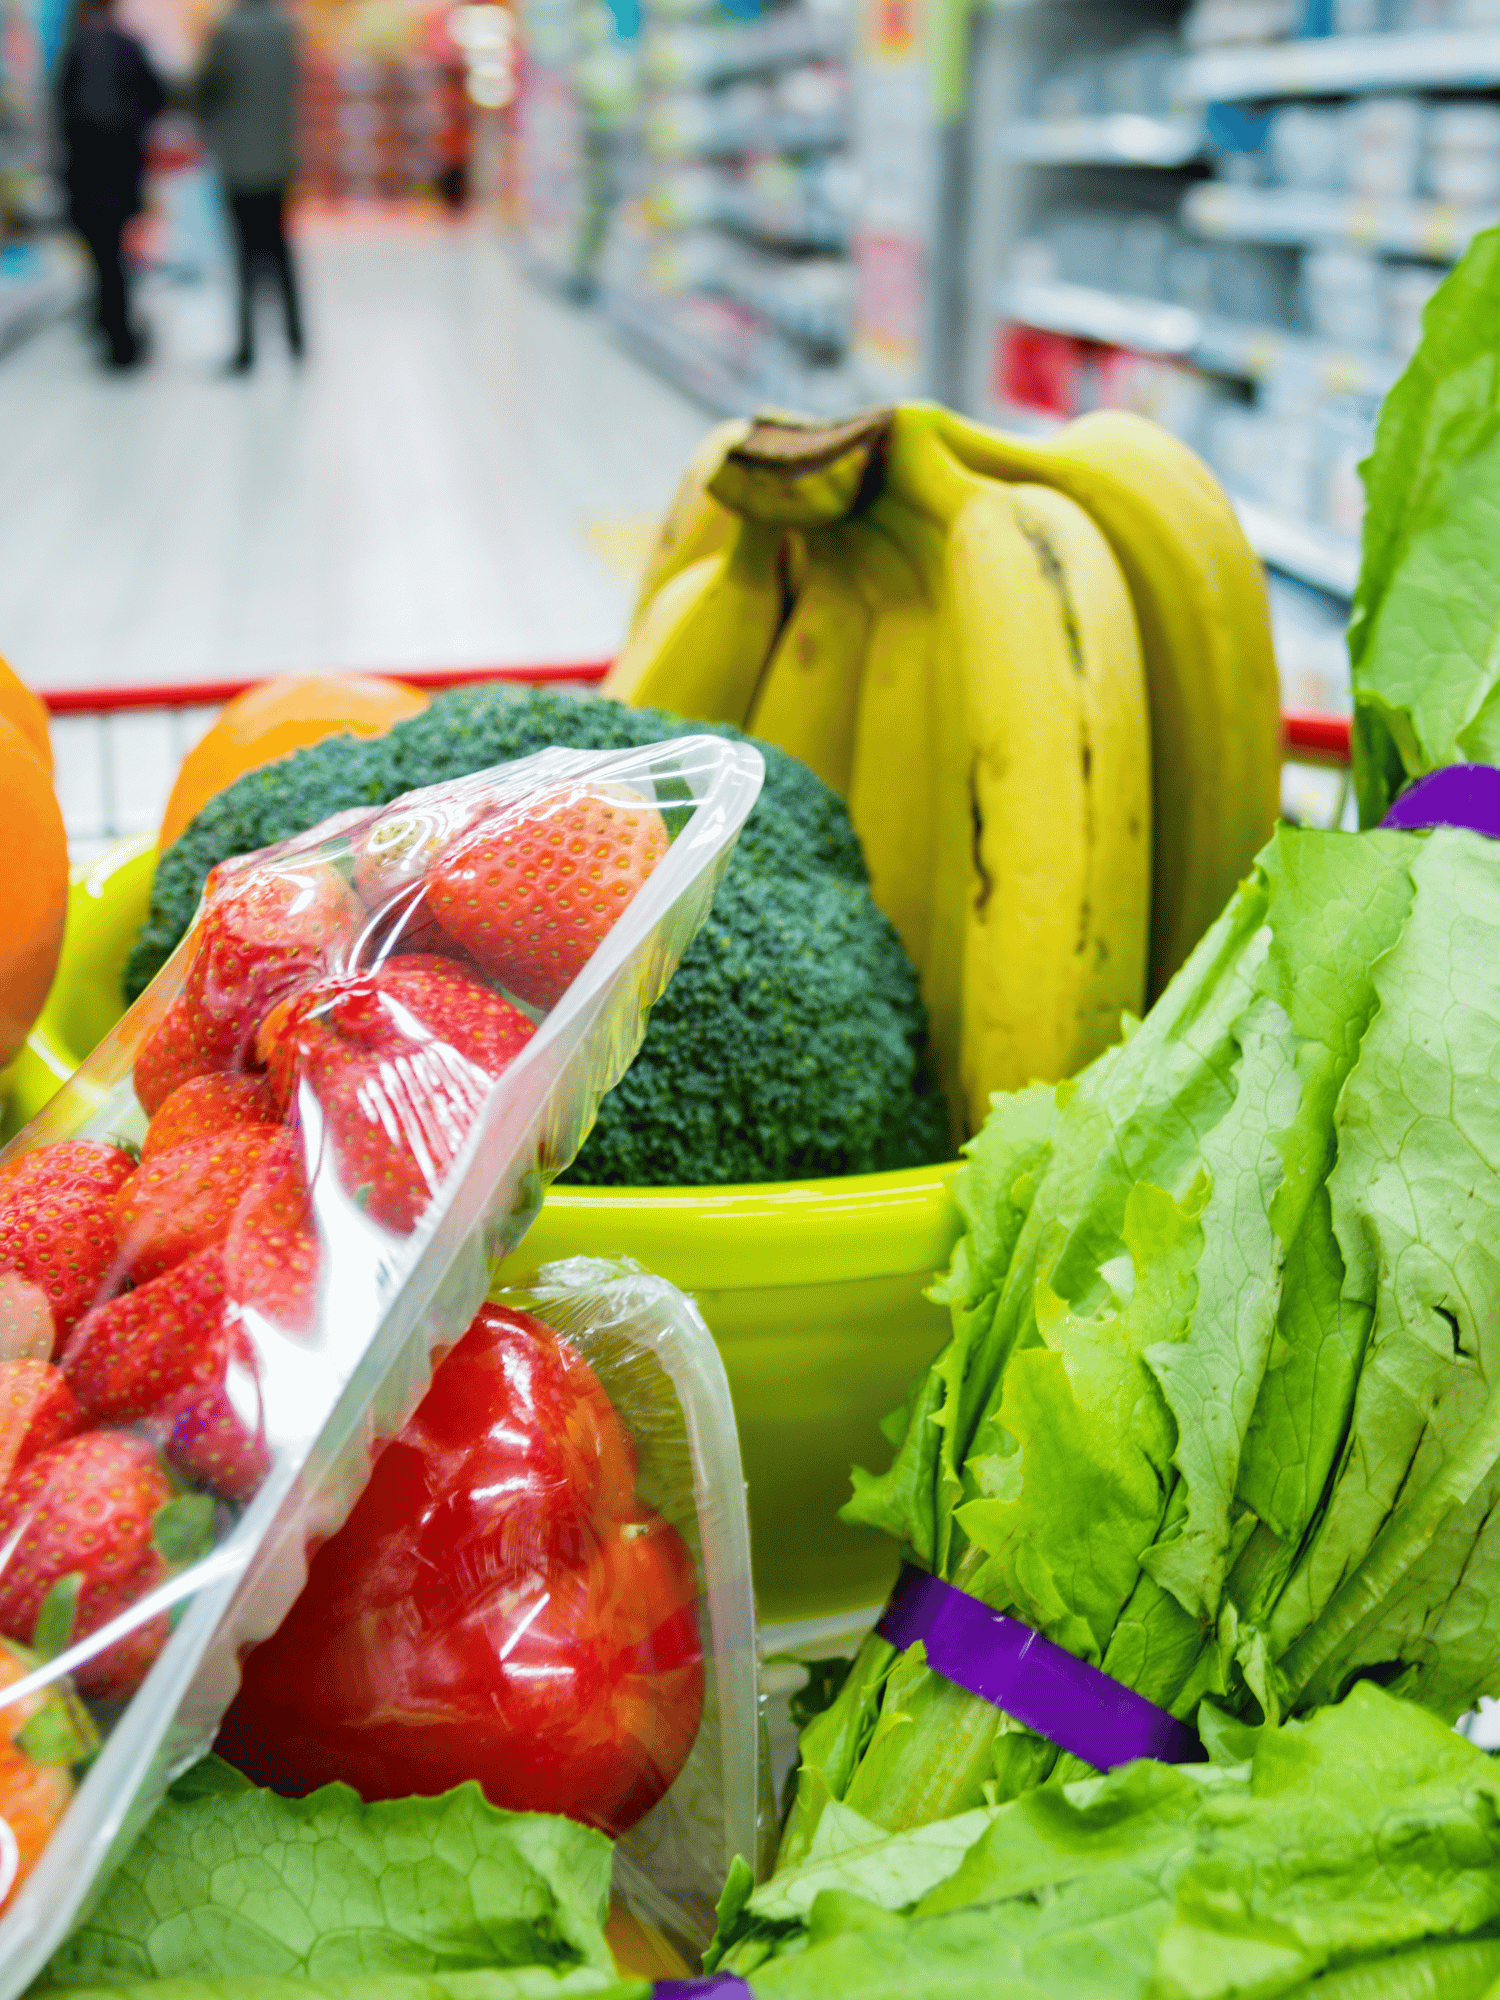 grocery cart full of lettuce, bananas, broccoli, peppers and strawberries